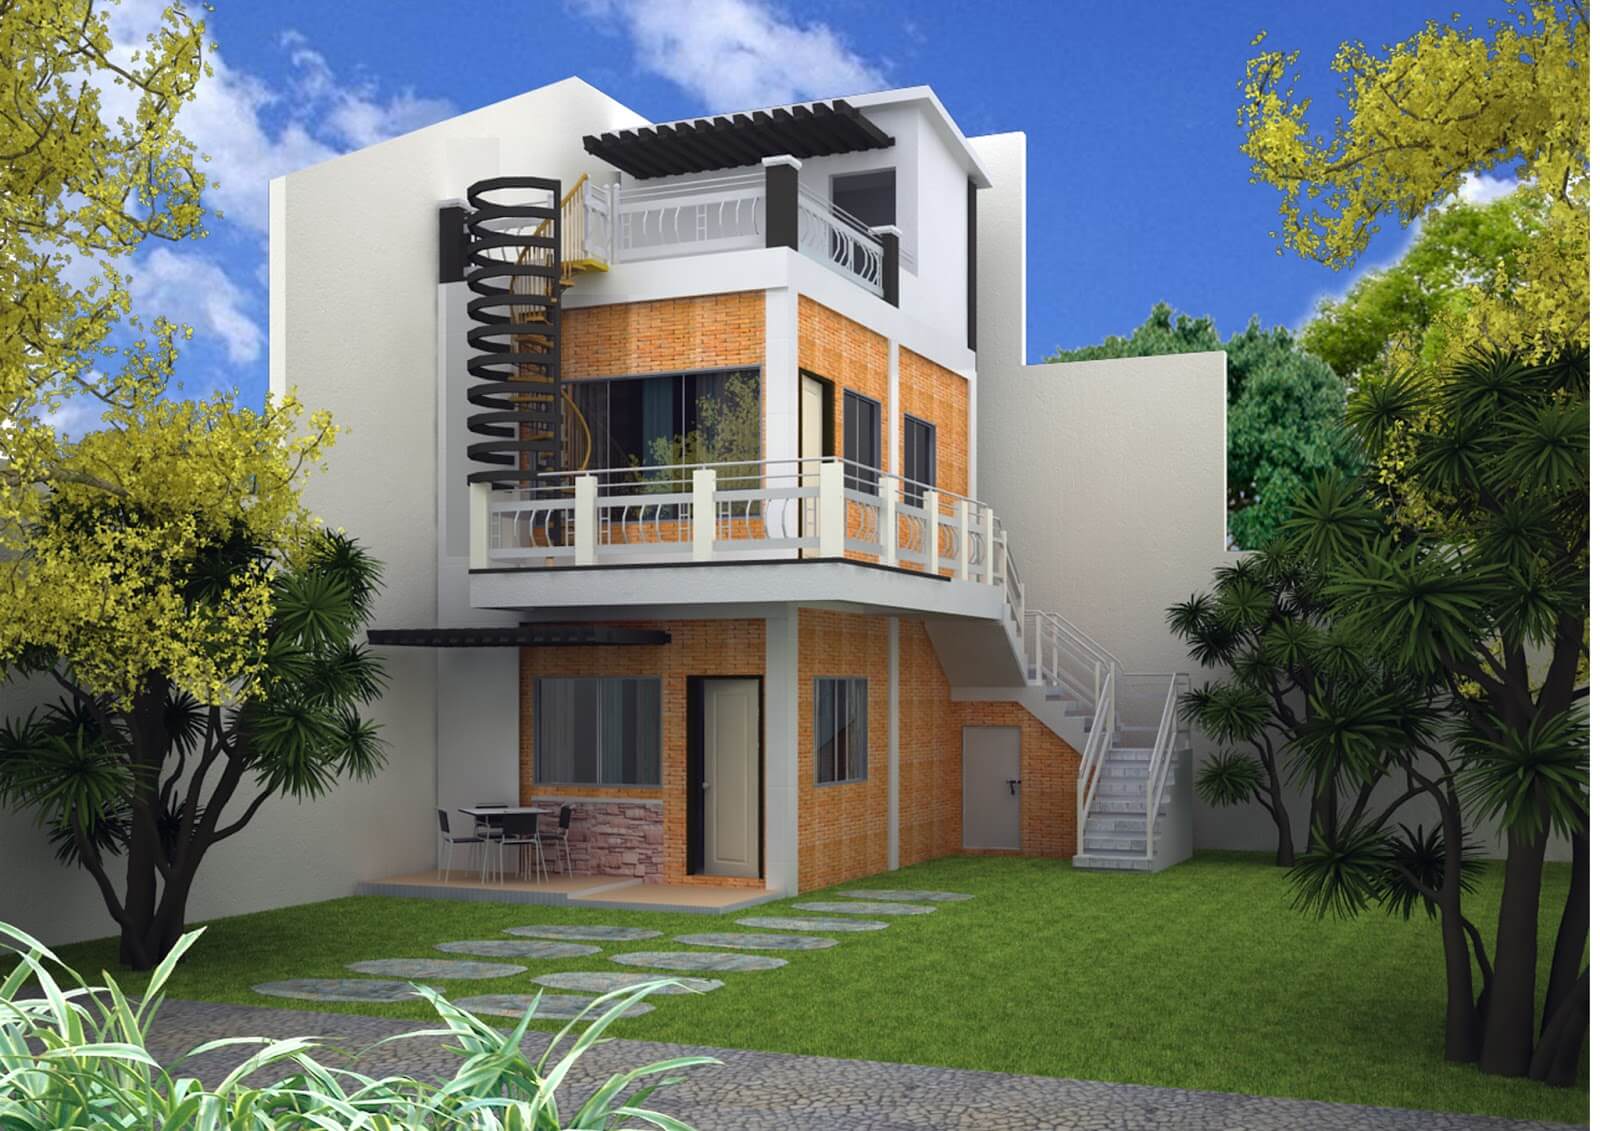 Best 3 Storey House Designs With Rooftop – Live Enhanced | Live Enhanced